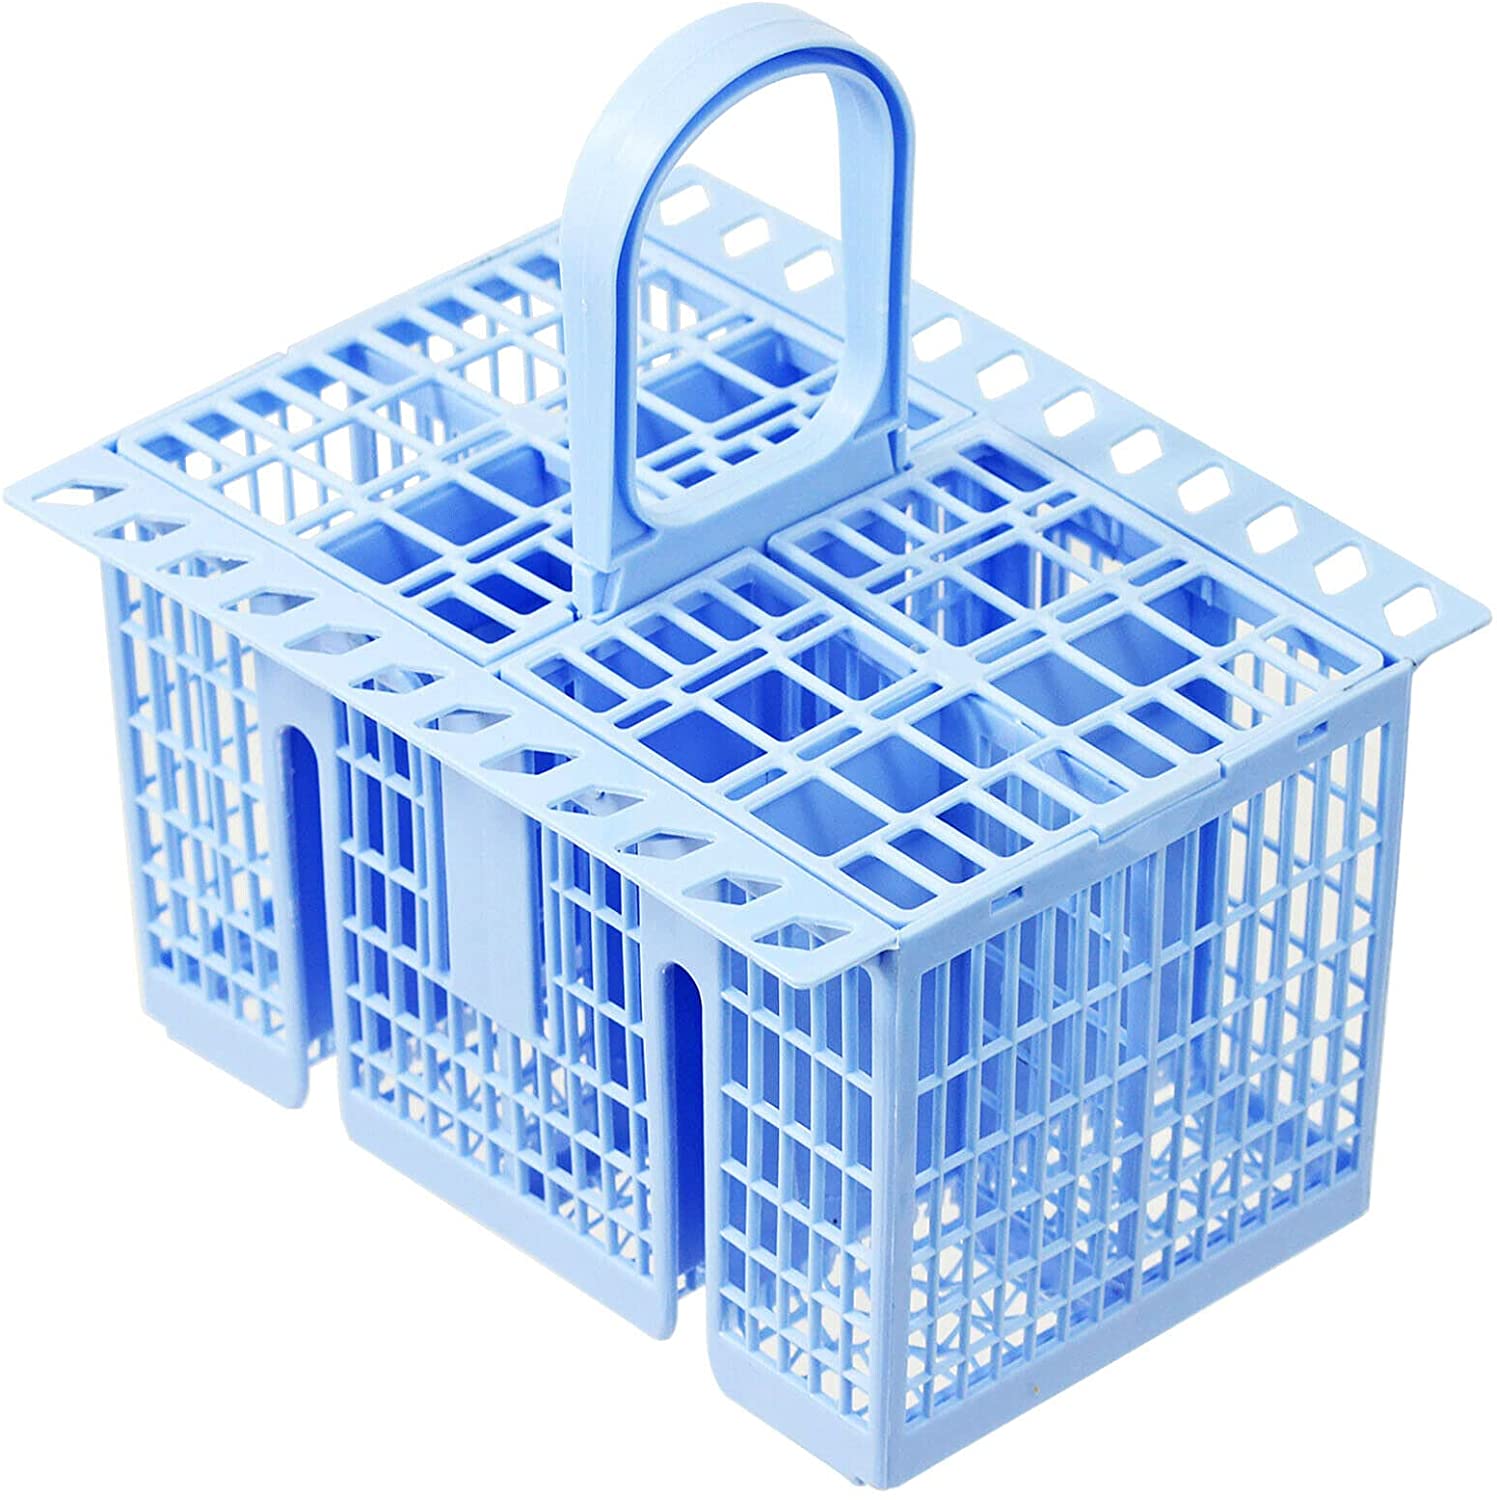 SPARES2GO Cutlery Basket compatible with Kenwood Dishwasher (Blue, 220 x 208 x 160mm)